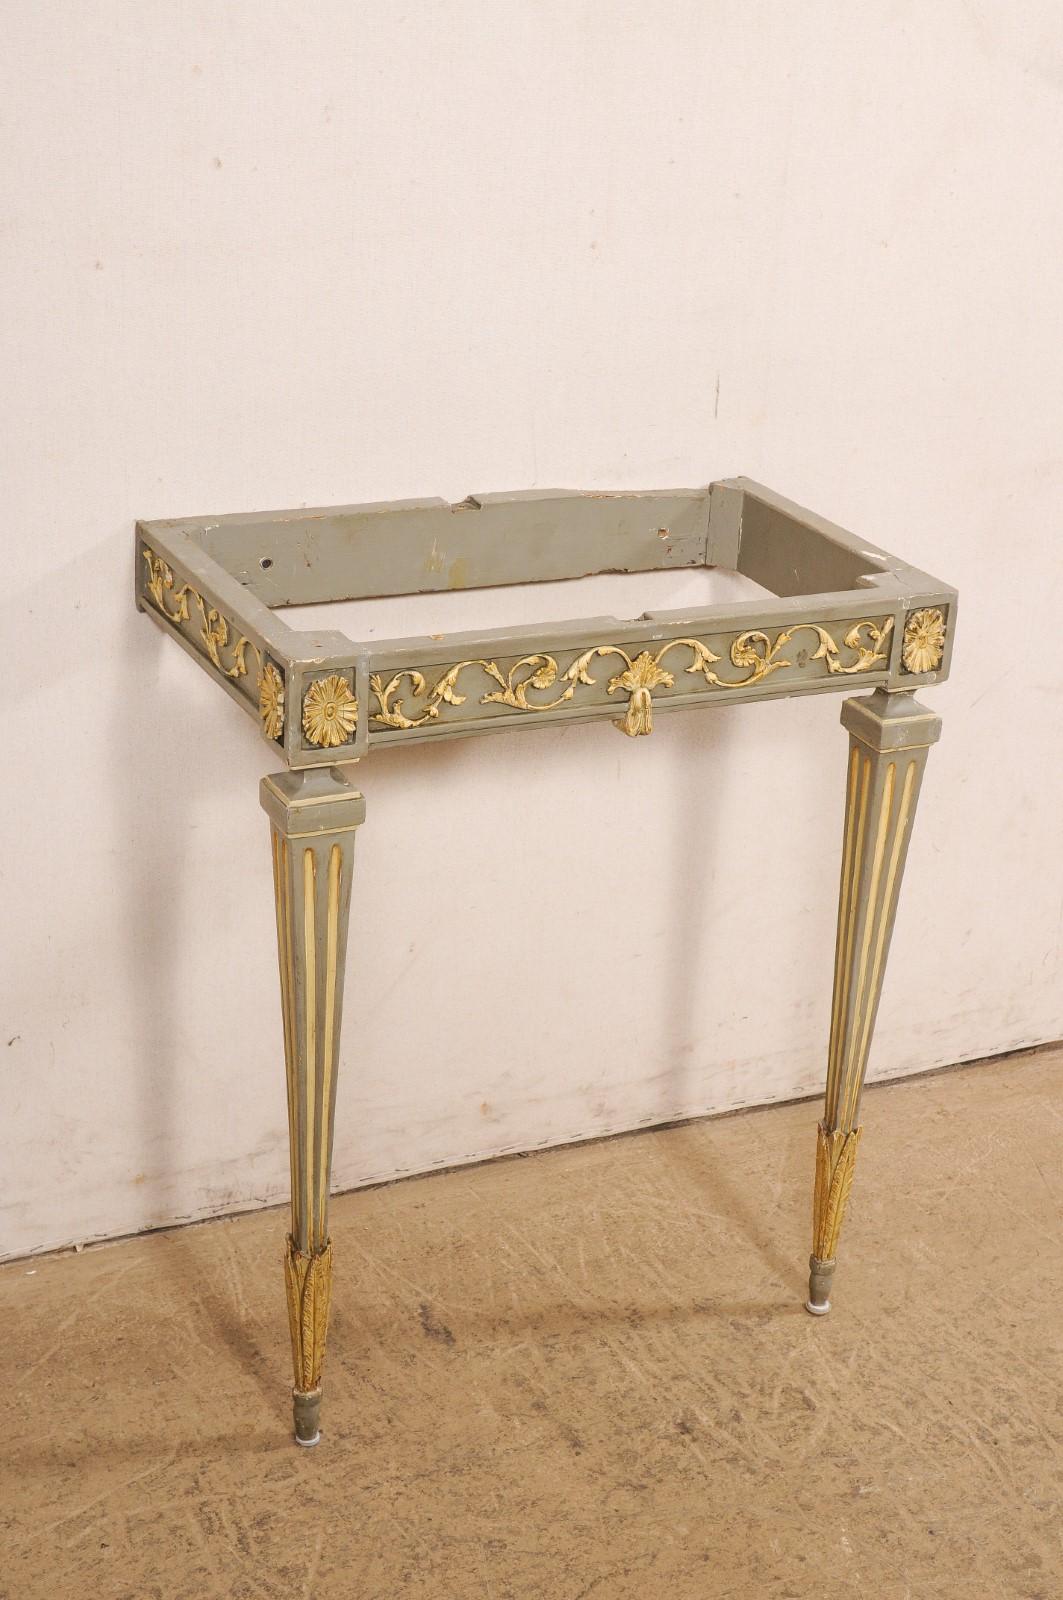 An Italian carved-wood wall console table, with beautiful green marble top, from the 19th century. This antique table from Italy features a rectangular-shaped marble top, which rests upon an apron adorn in carved and gilt scrolling foliage and